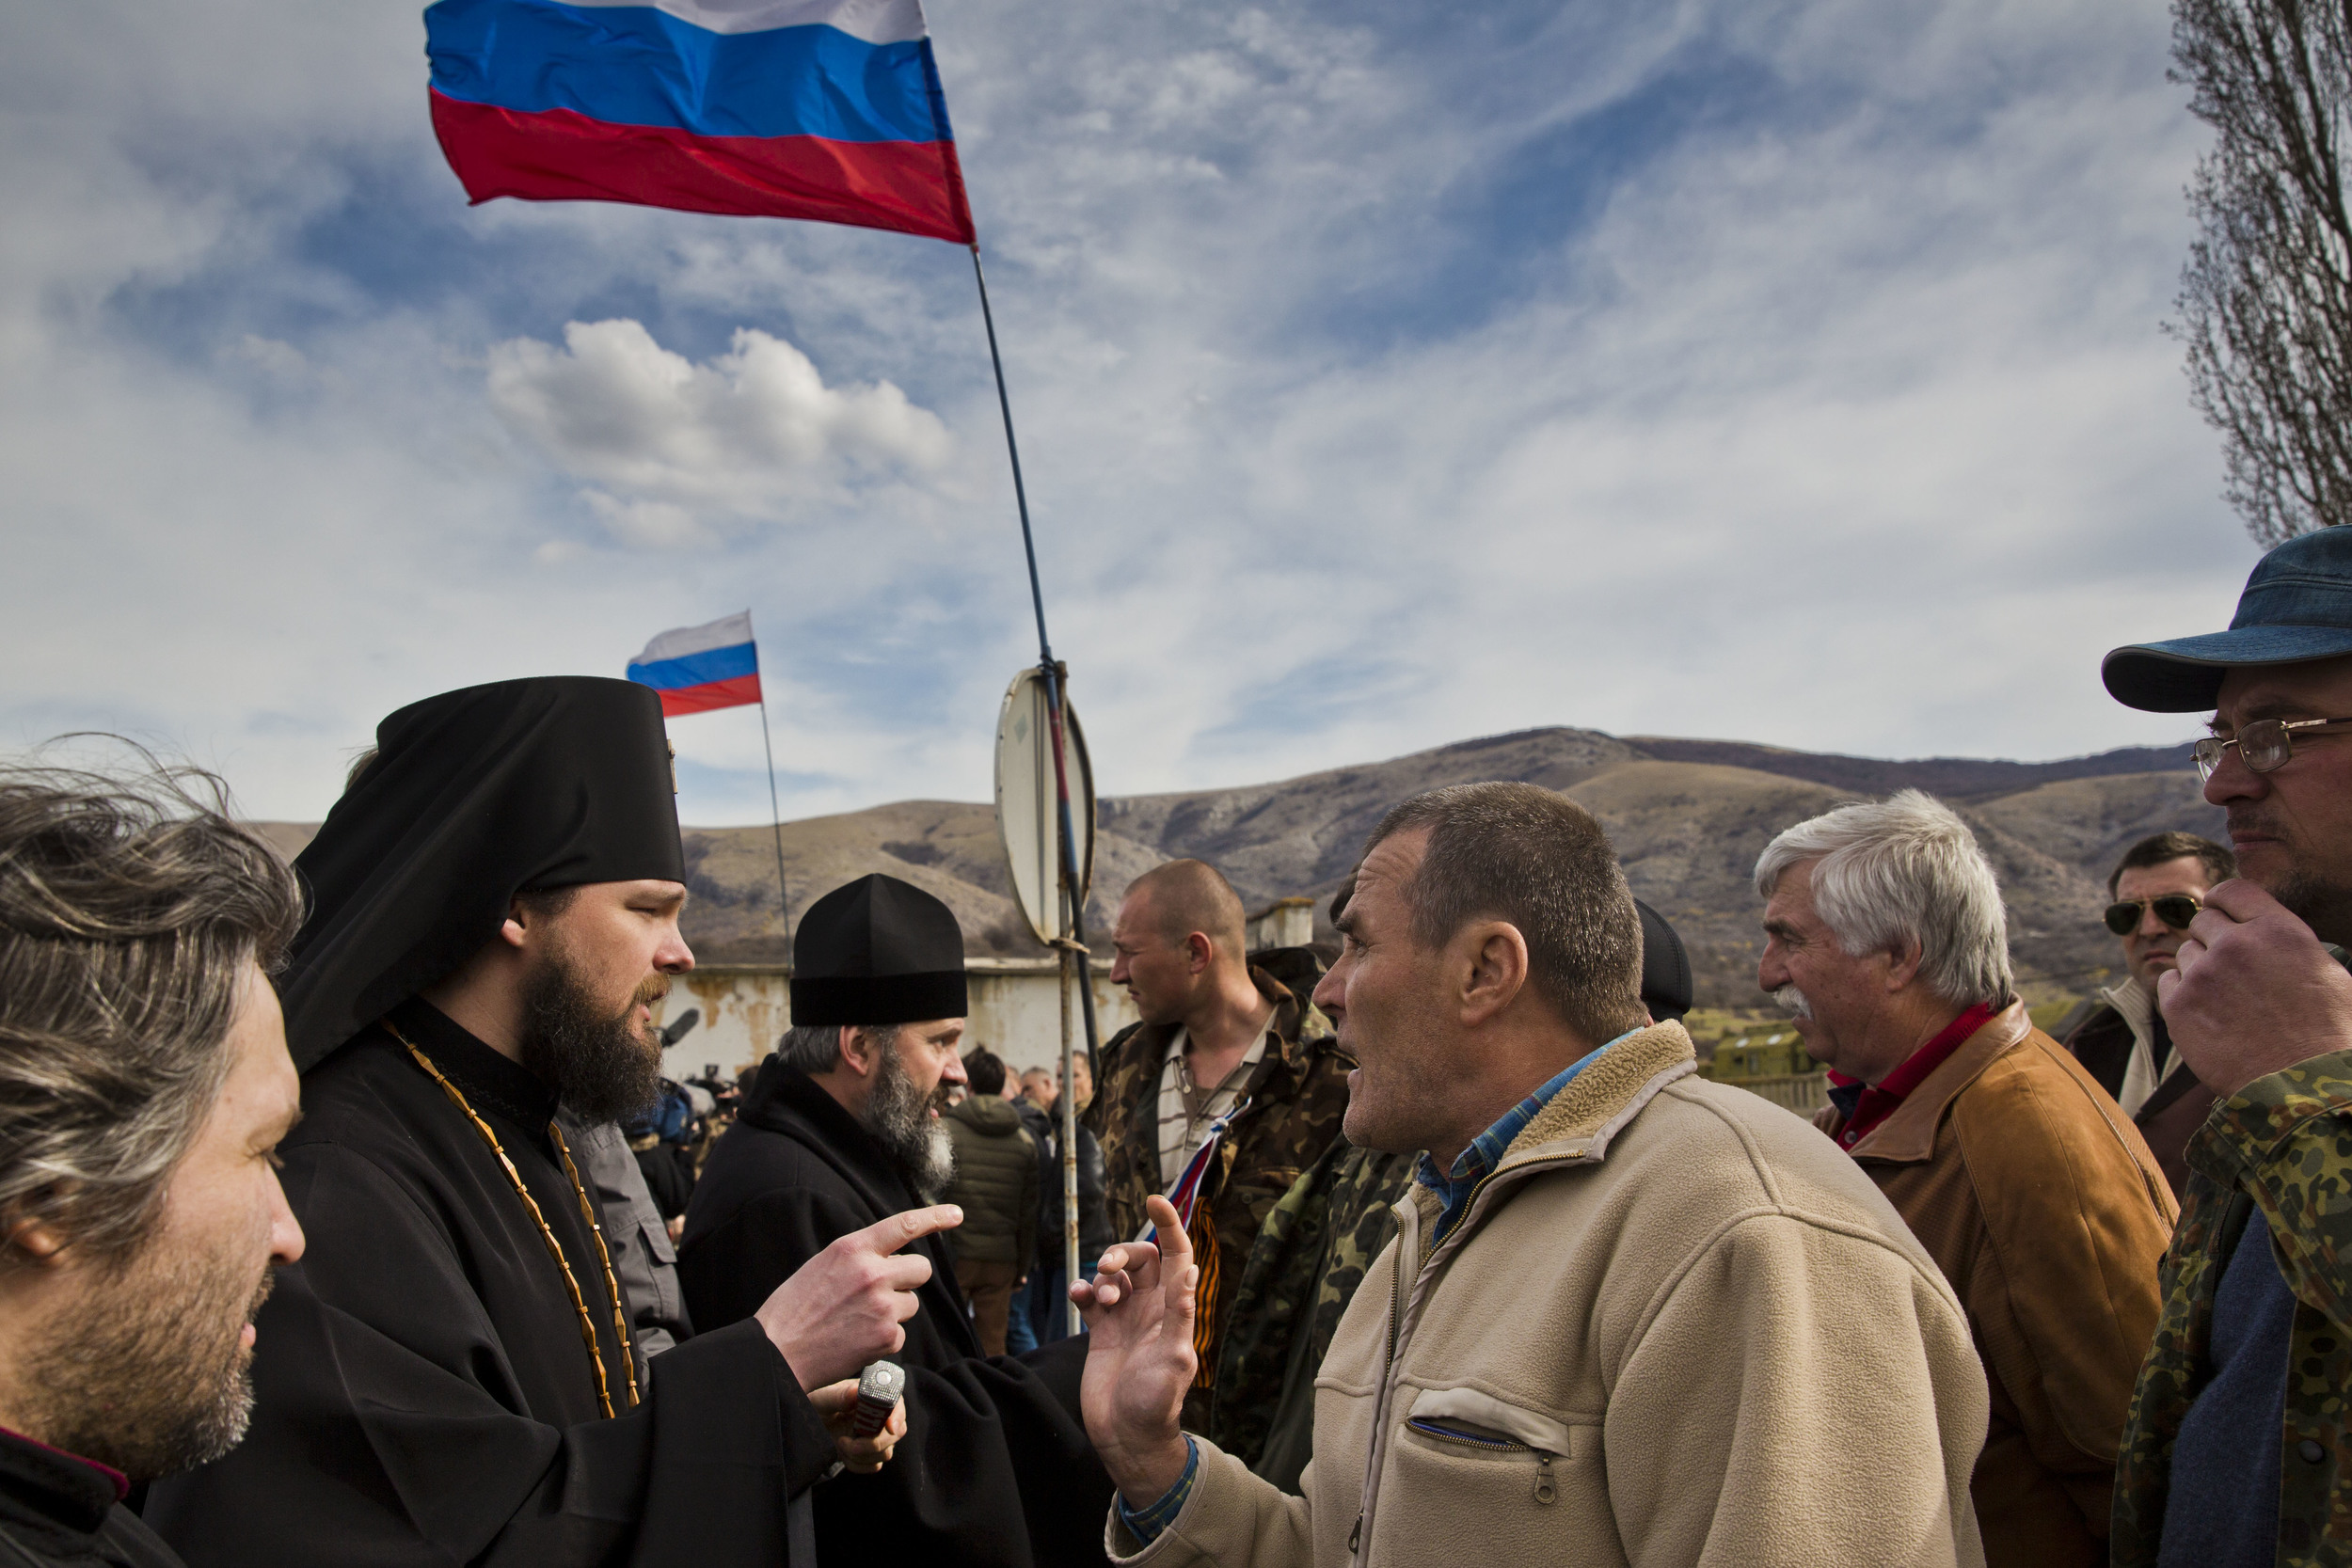 Pro-Russian militiamen are seen confronting a priest on his way to a church situated on Ukrainian military base